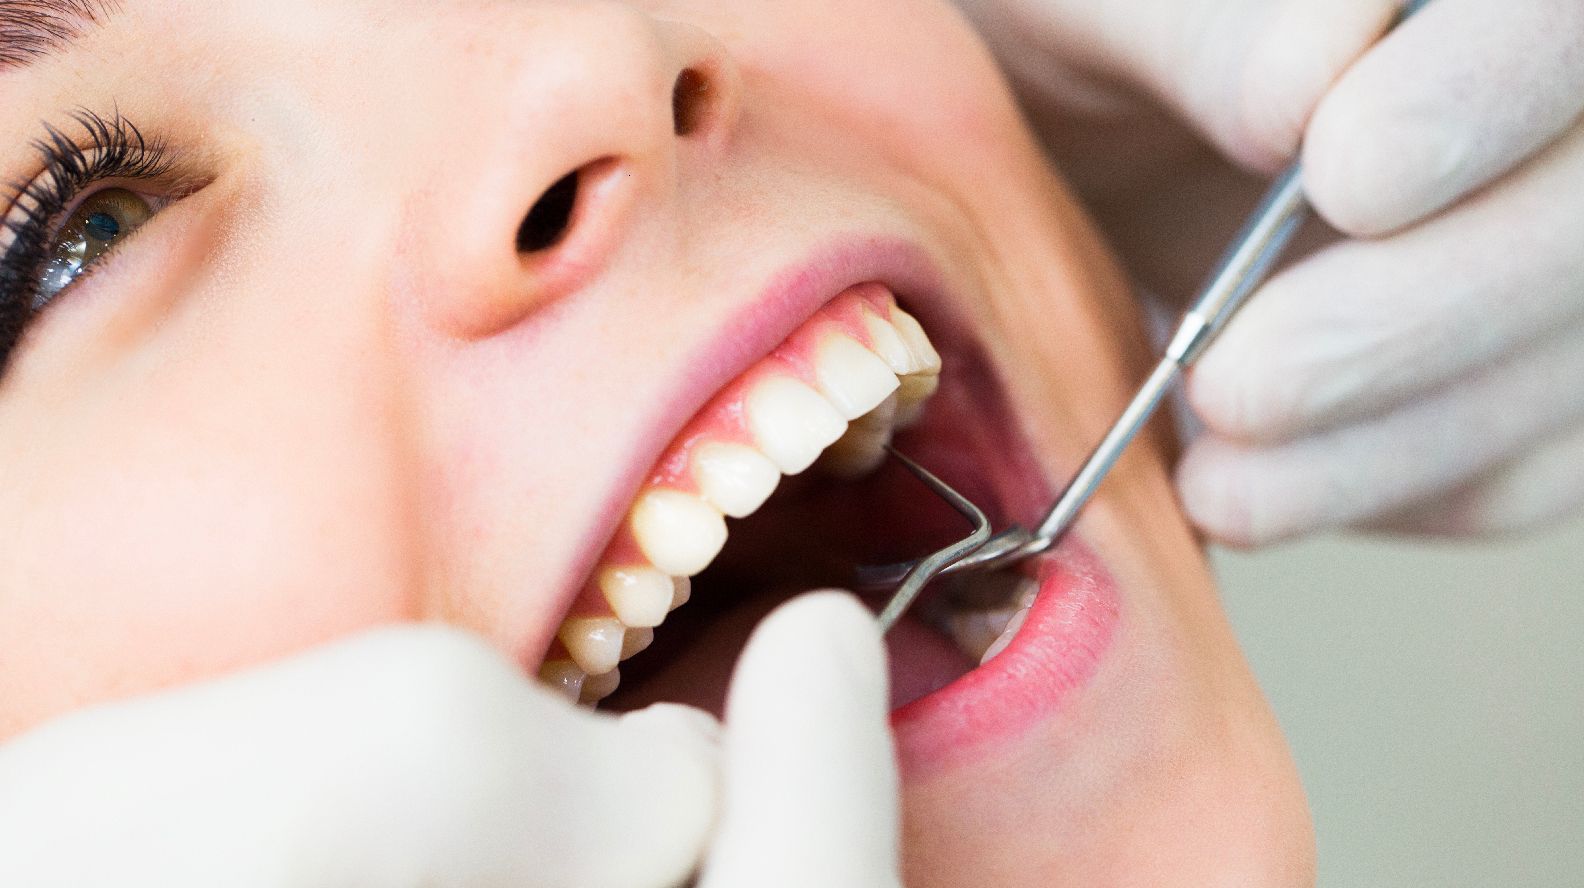 Fillings and Root Canals